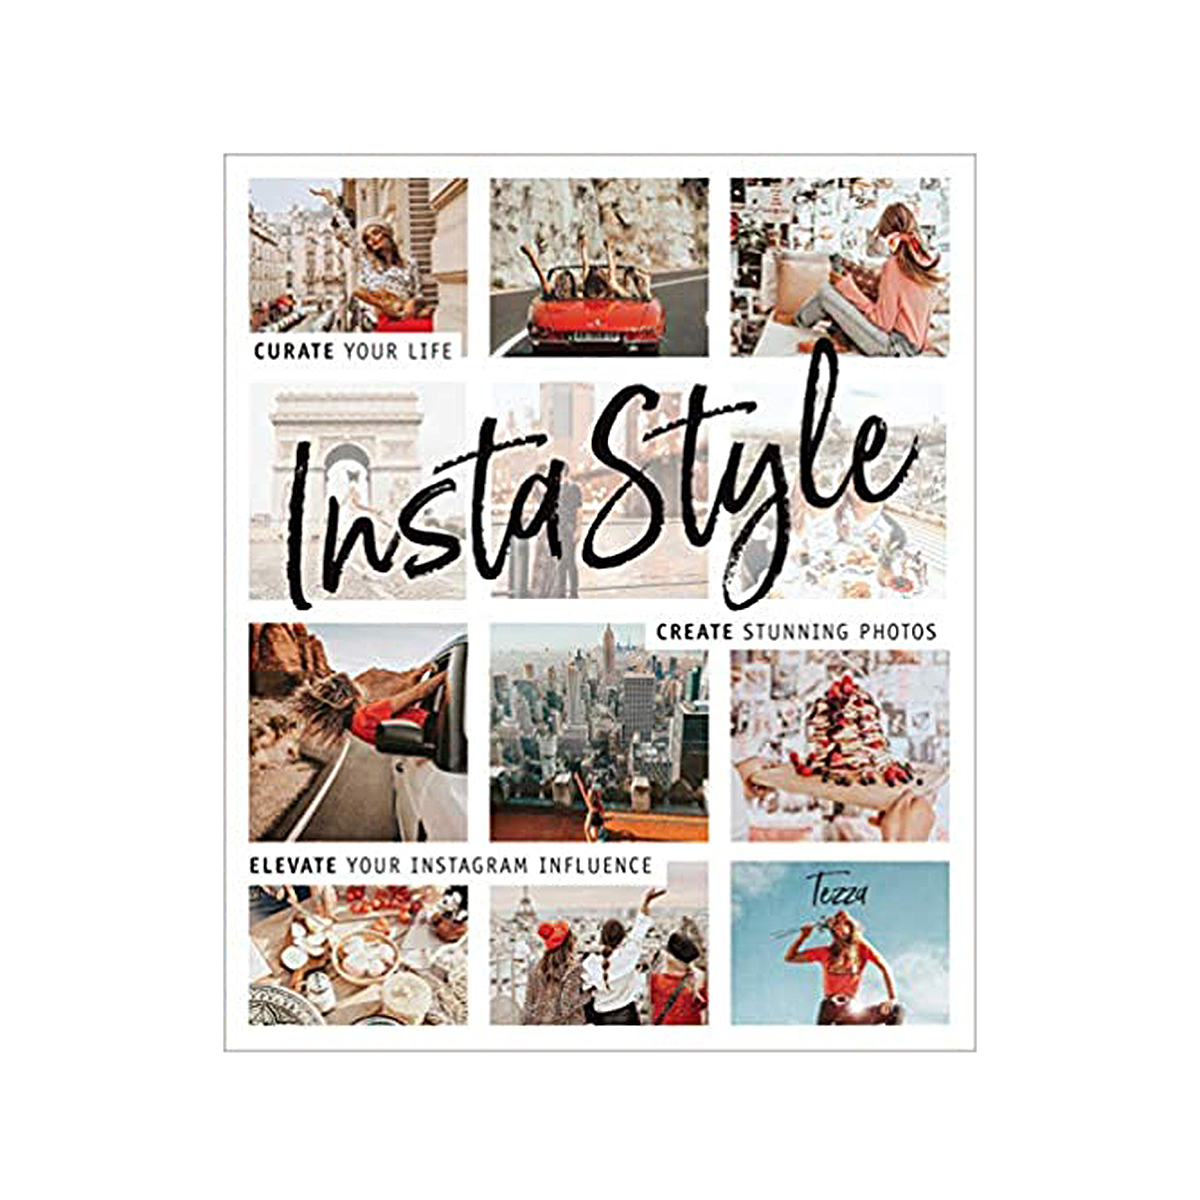 https://www.usmagazine.com/wp-content/uploads/2021/11/holiday-gifts-under-50-instastyle.jpg?quality=78&strip=all